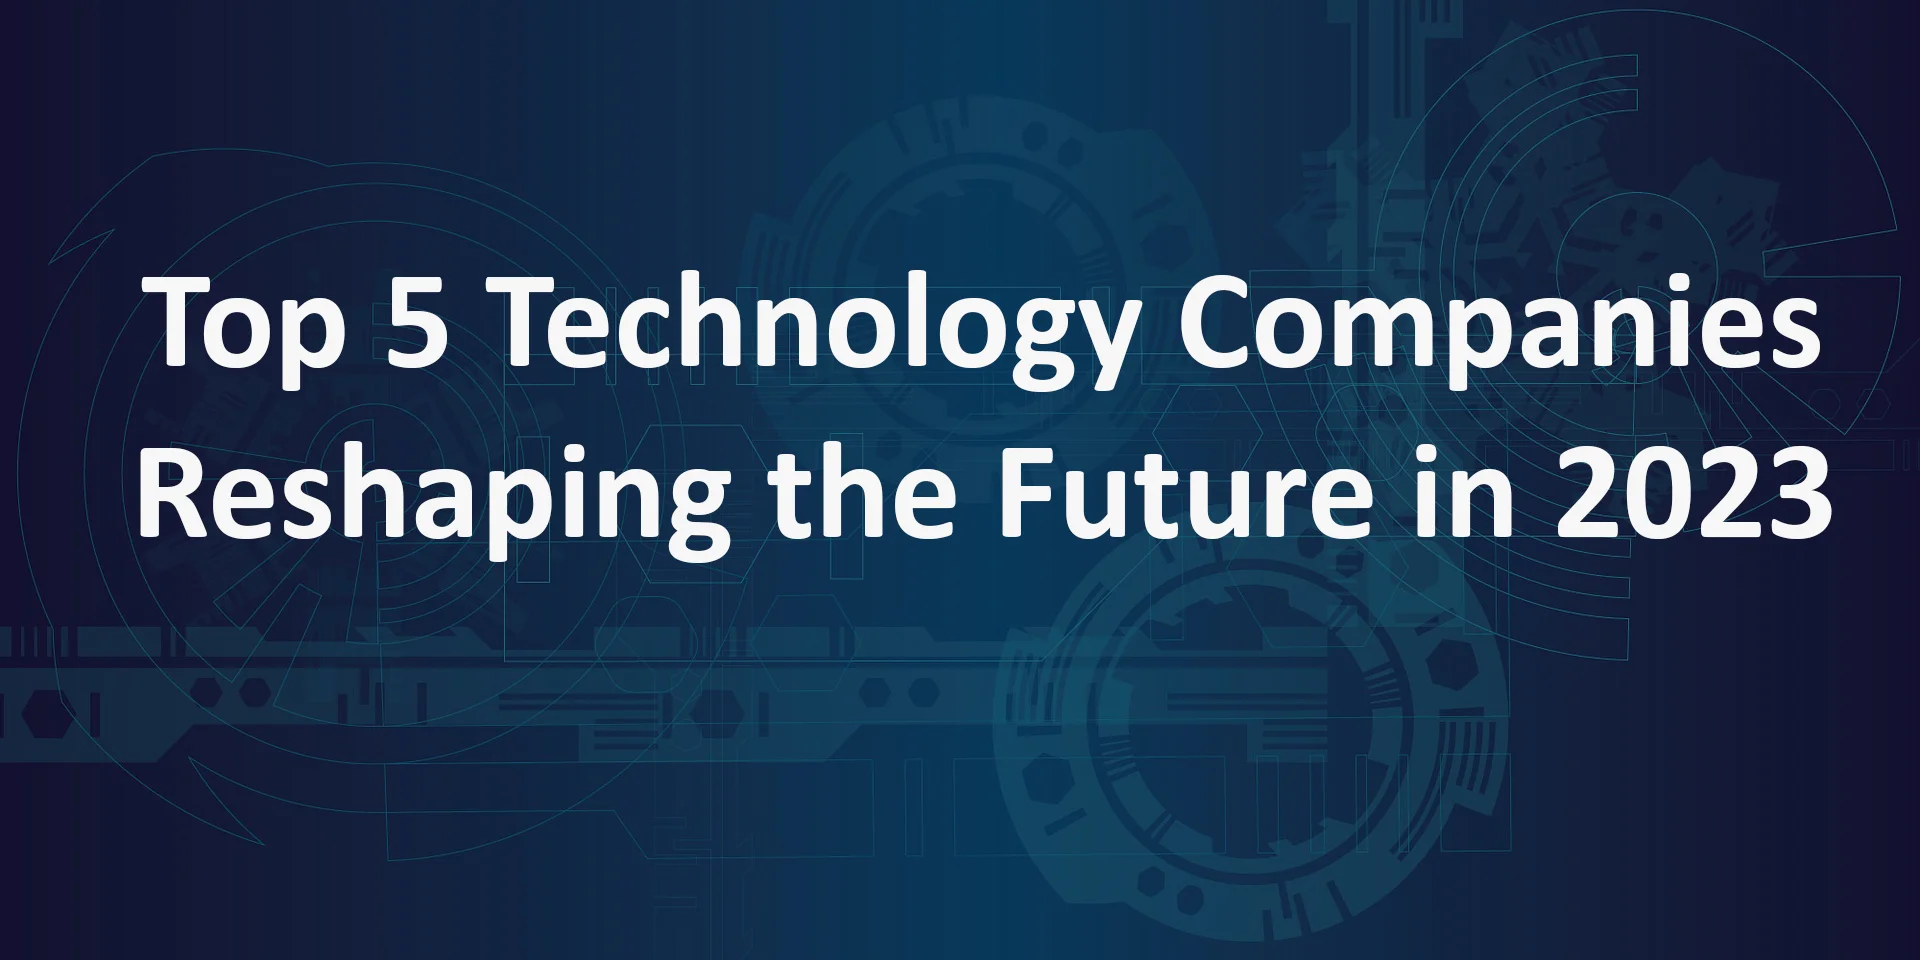 Technology Companies Reshaping the Future in 2023